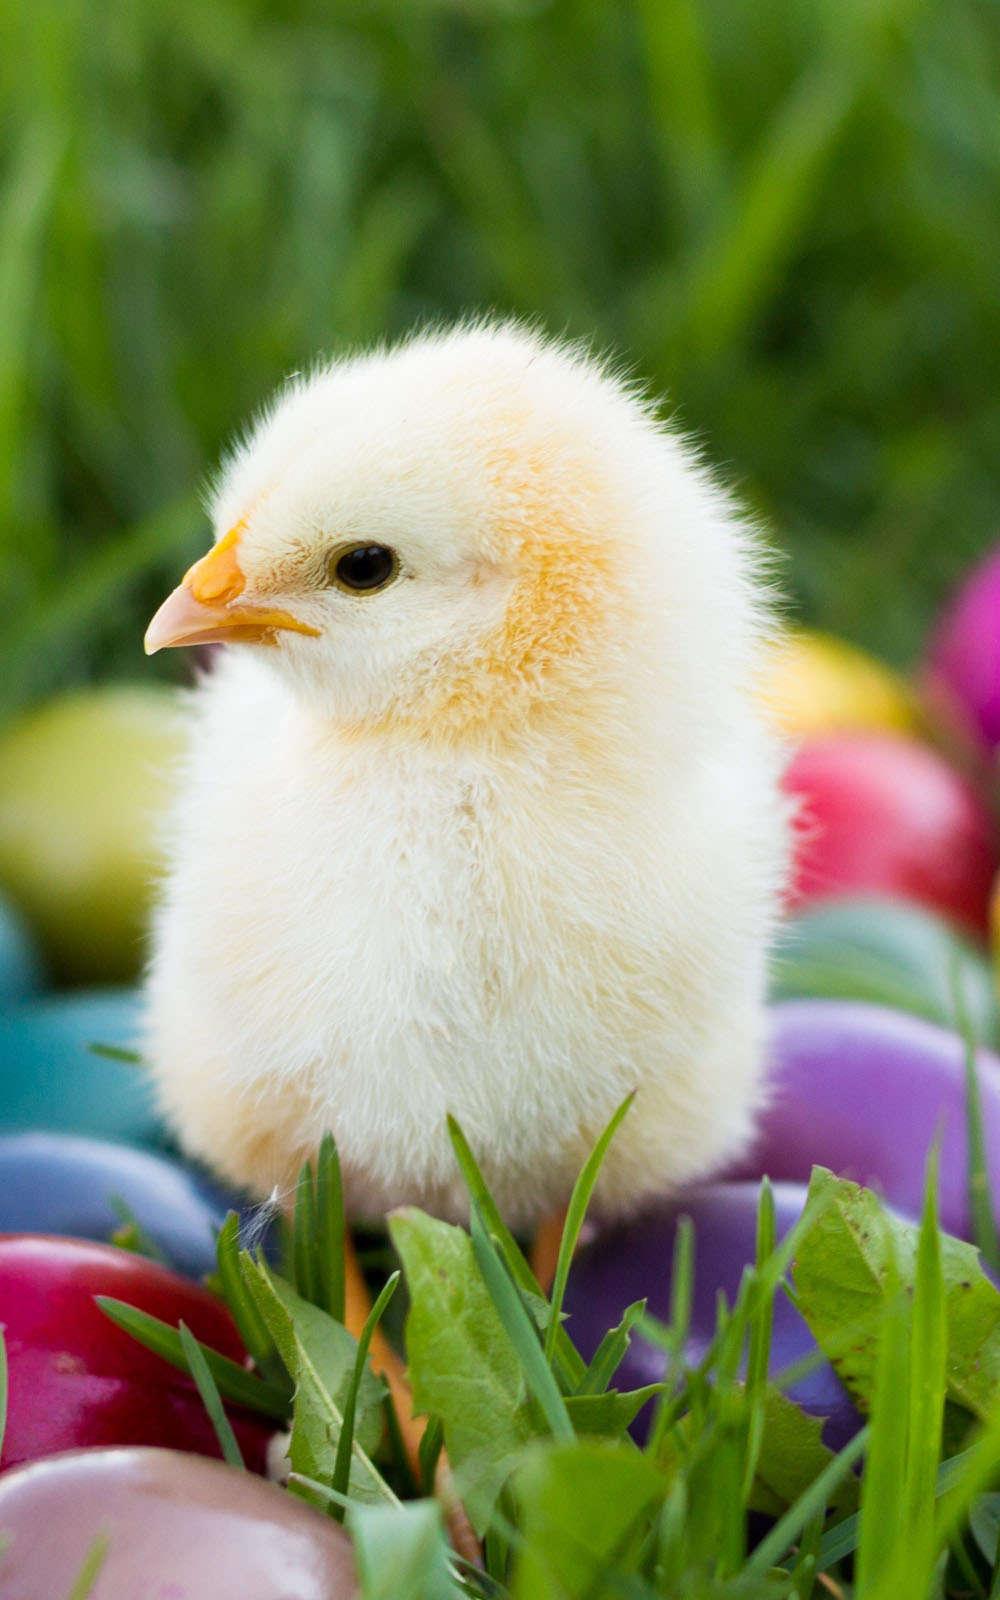 Homepage - Chick With Eggs